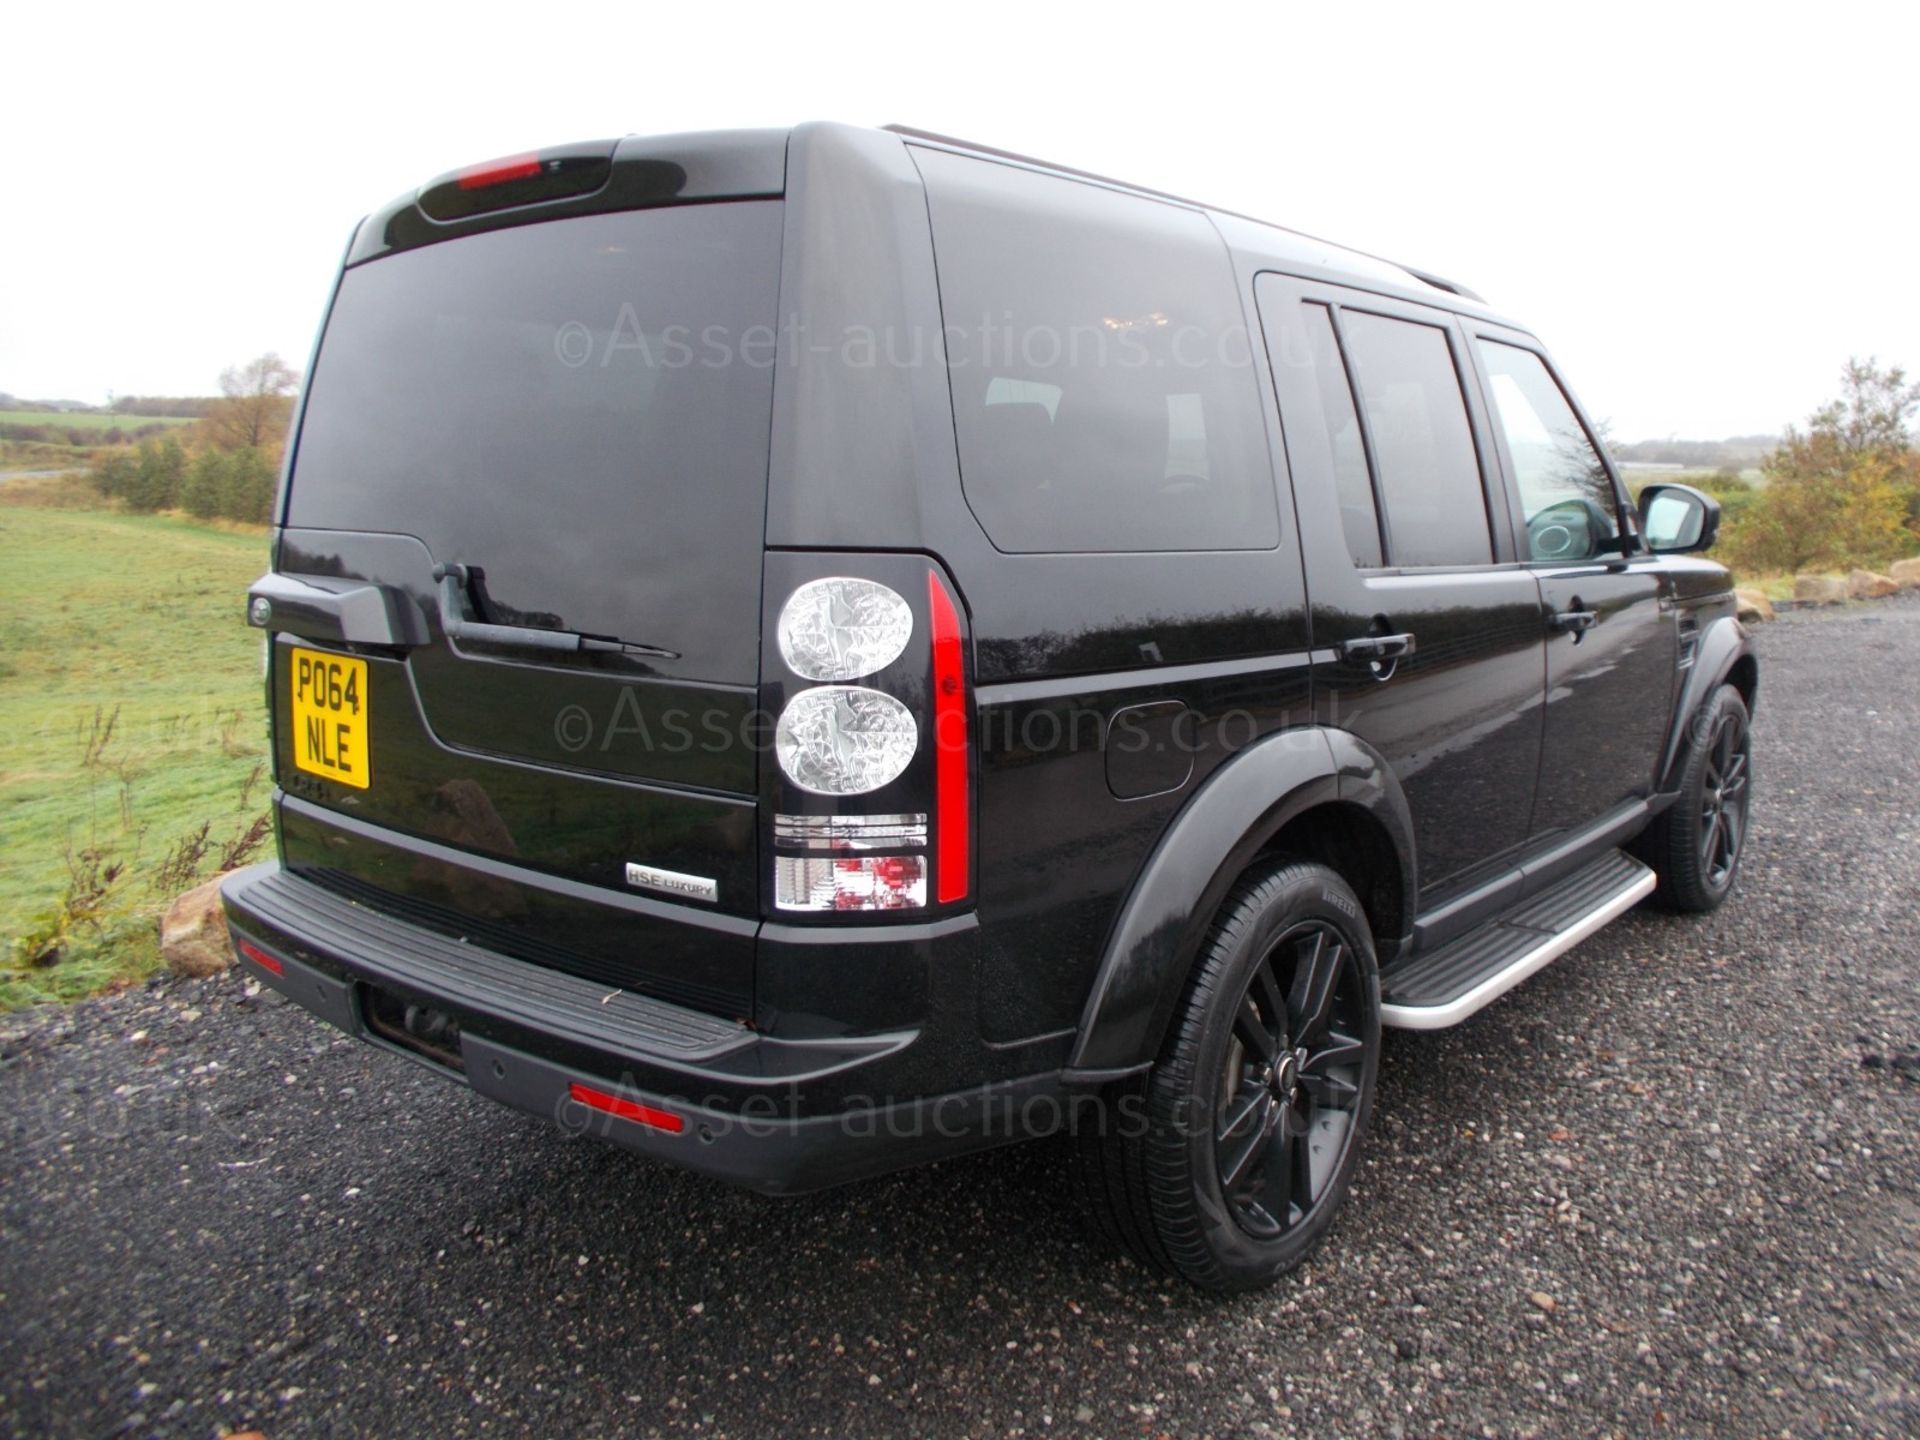 2015/64 LAND ROVER DISCOVERY HSE LUXURY SCV6 7 SEATER, 3.0 V6 PETROL SUPERCHARGED *NO VAT* - Image 7 of 27